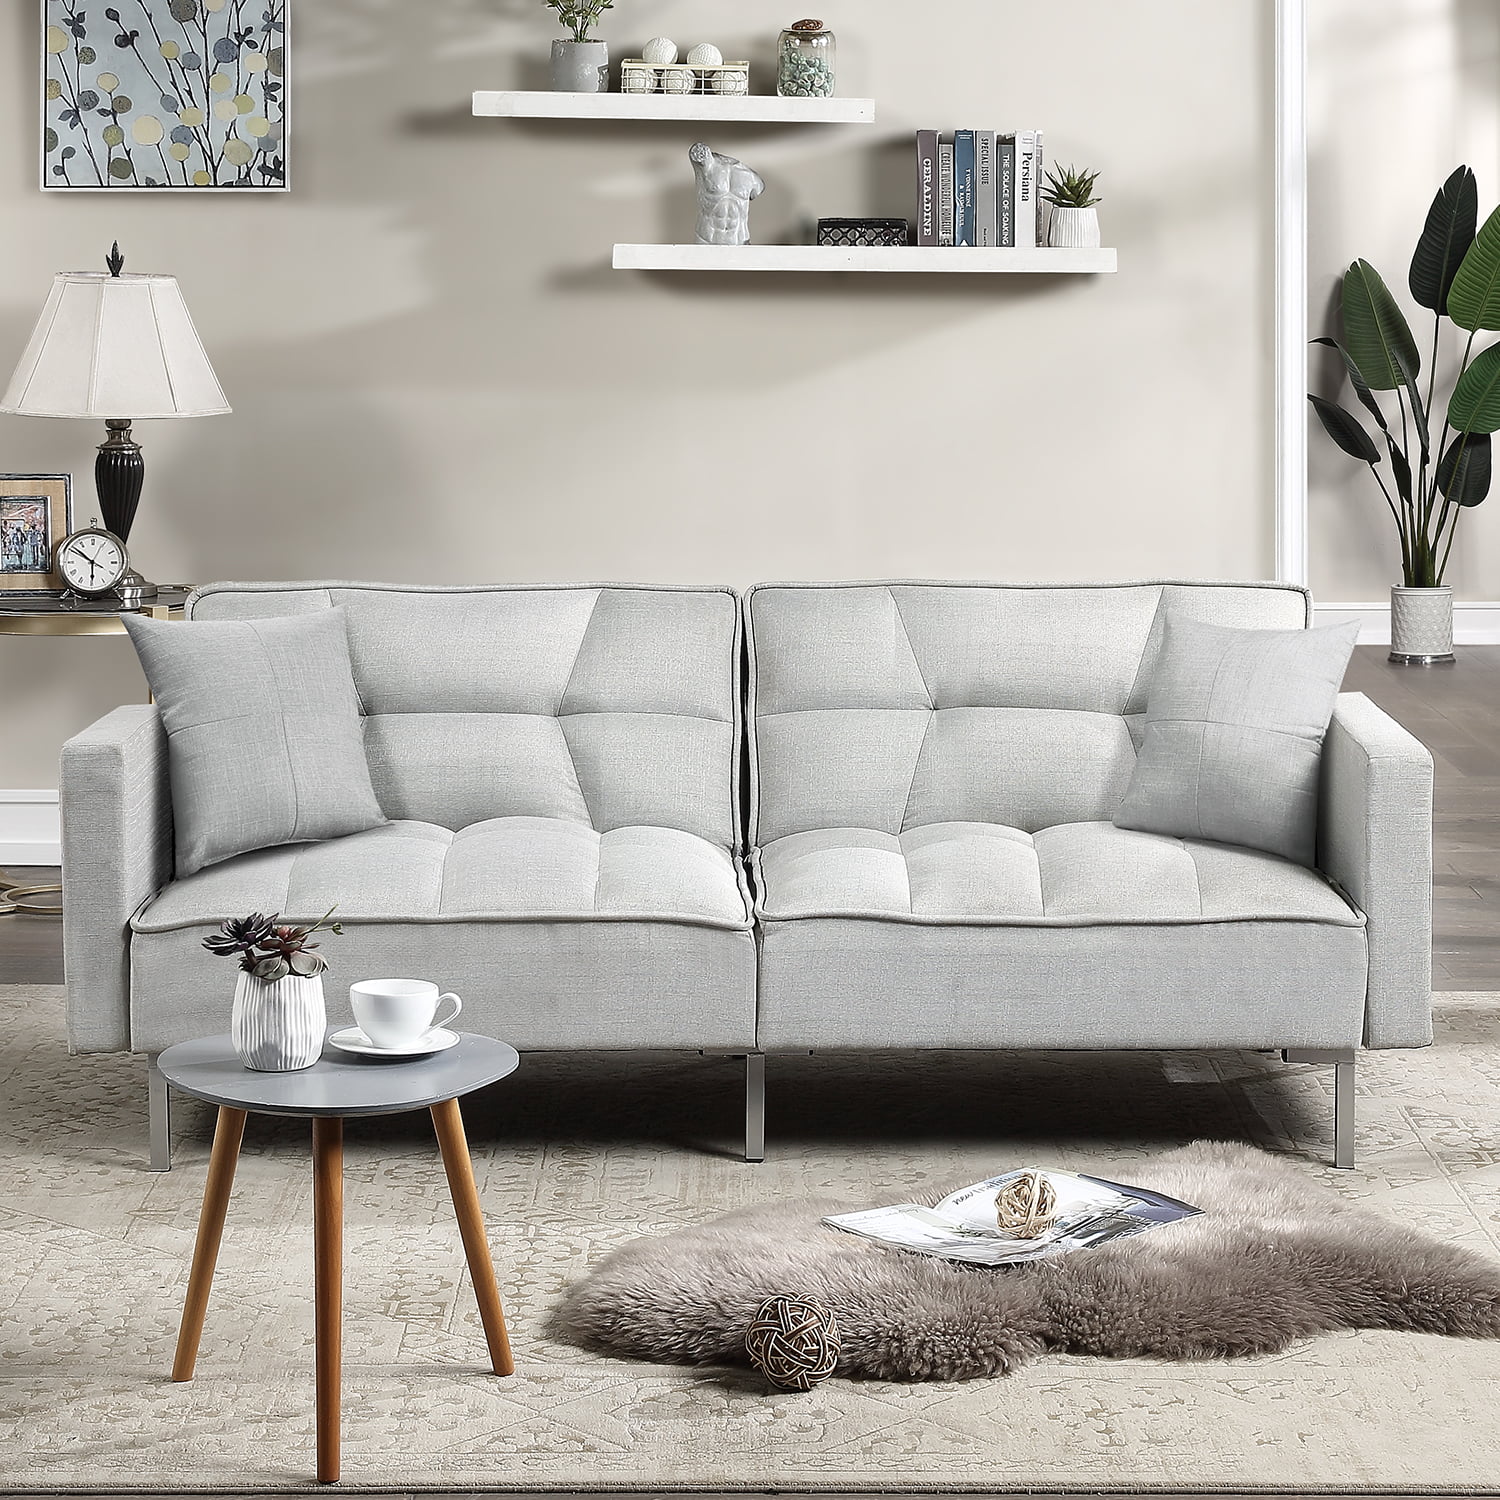 Clearance Mid Century Modern Sofa Bed Sectional Sofa With Metal Legs